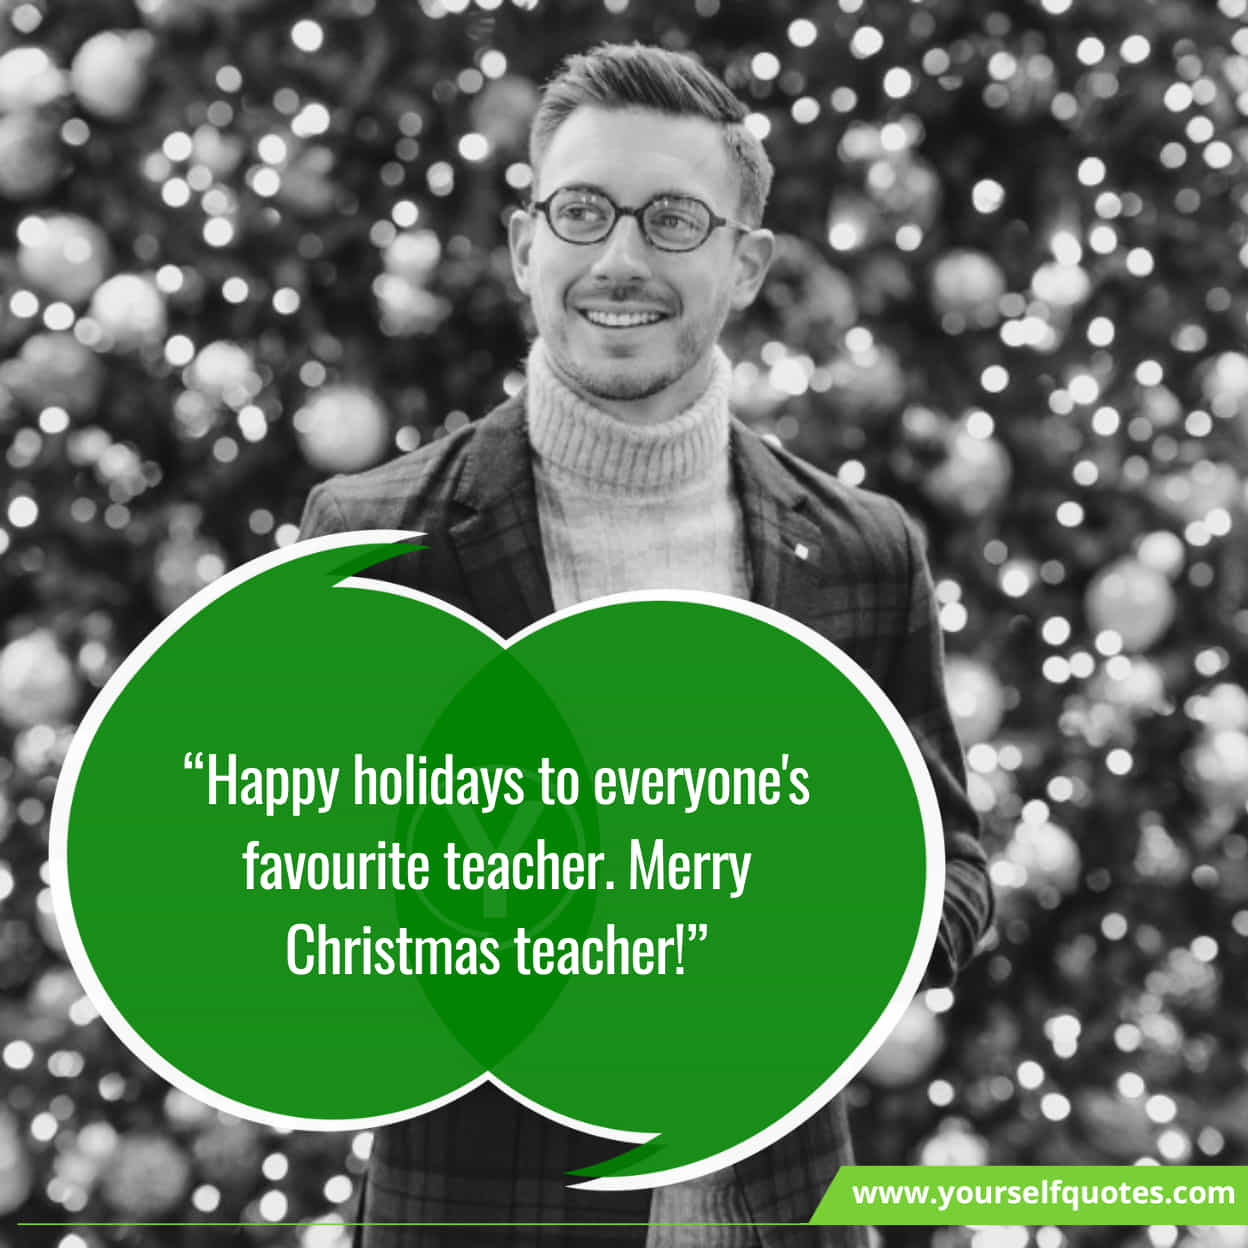 Best Merry Christmas Wishes for Teacher